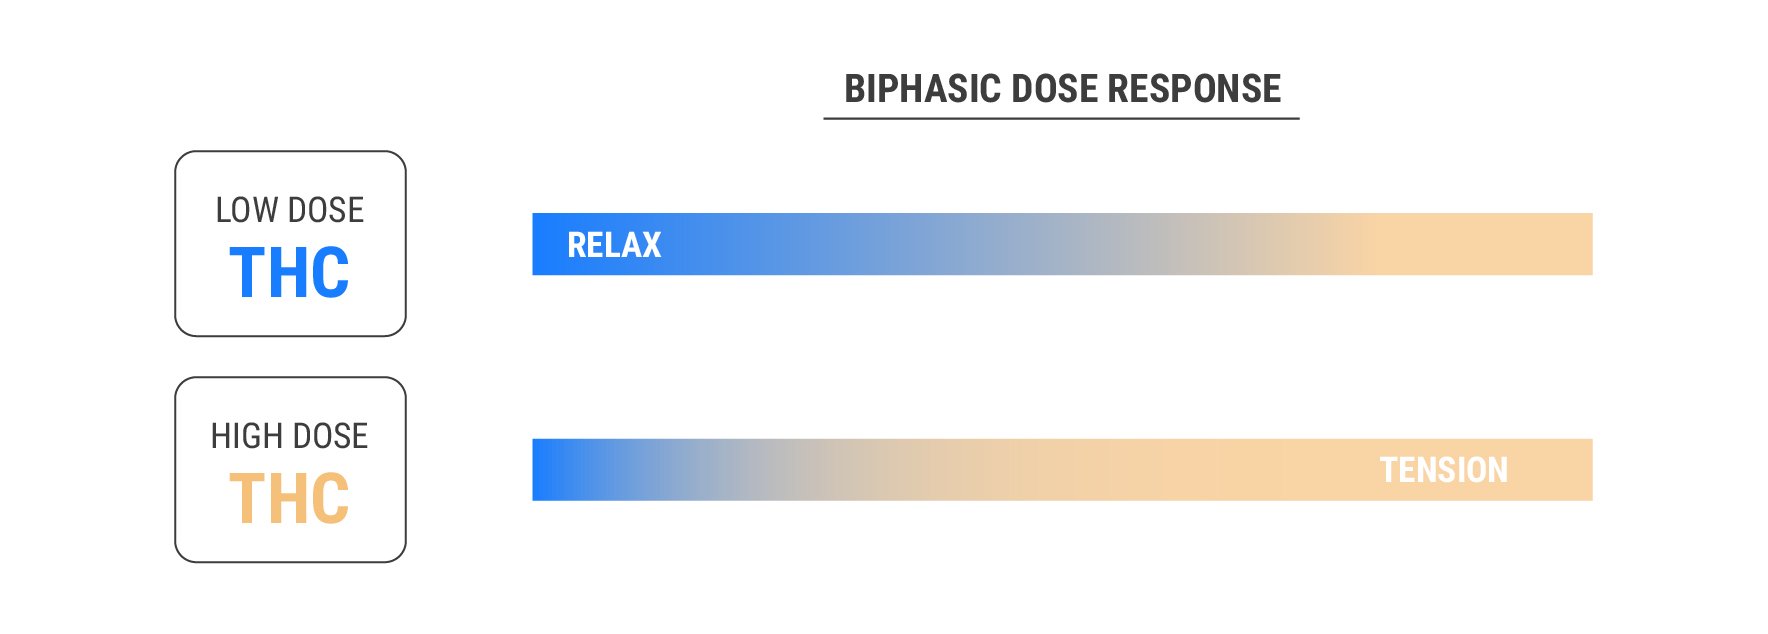 THC and the Biphasic Dose Response